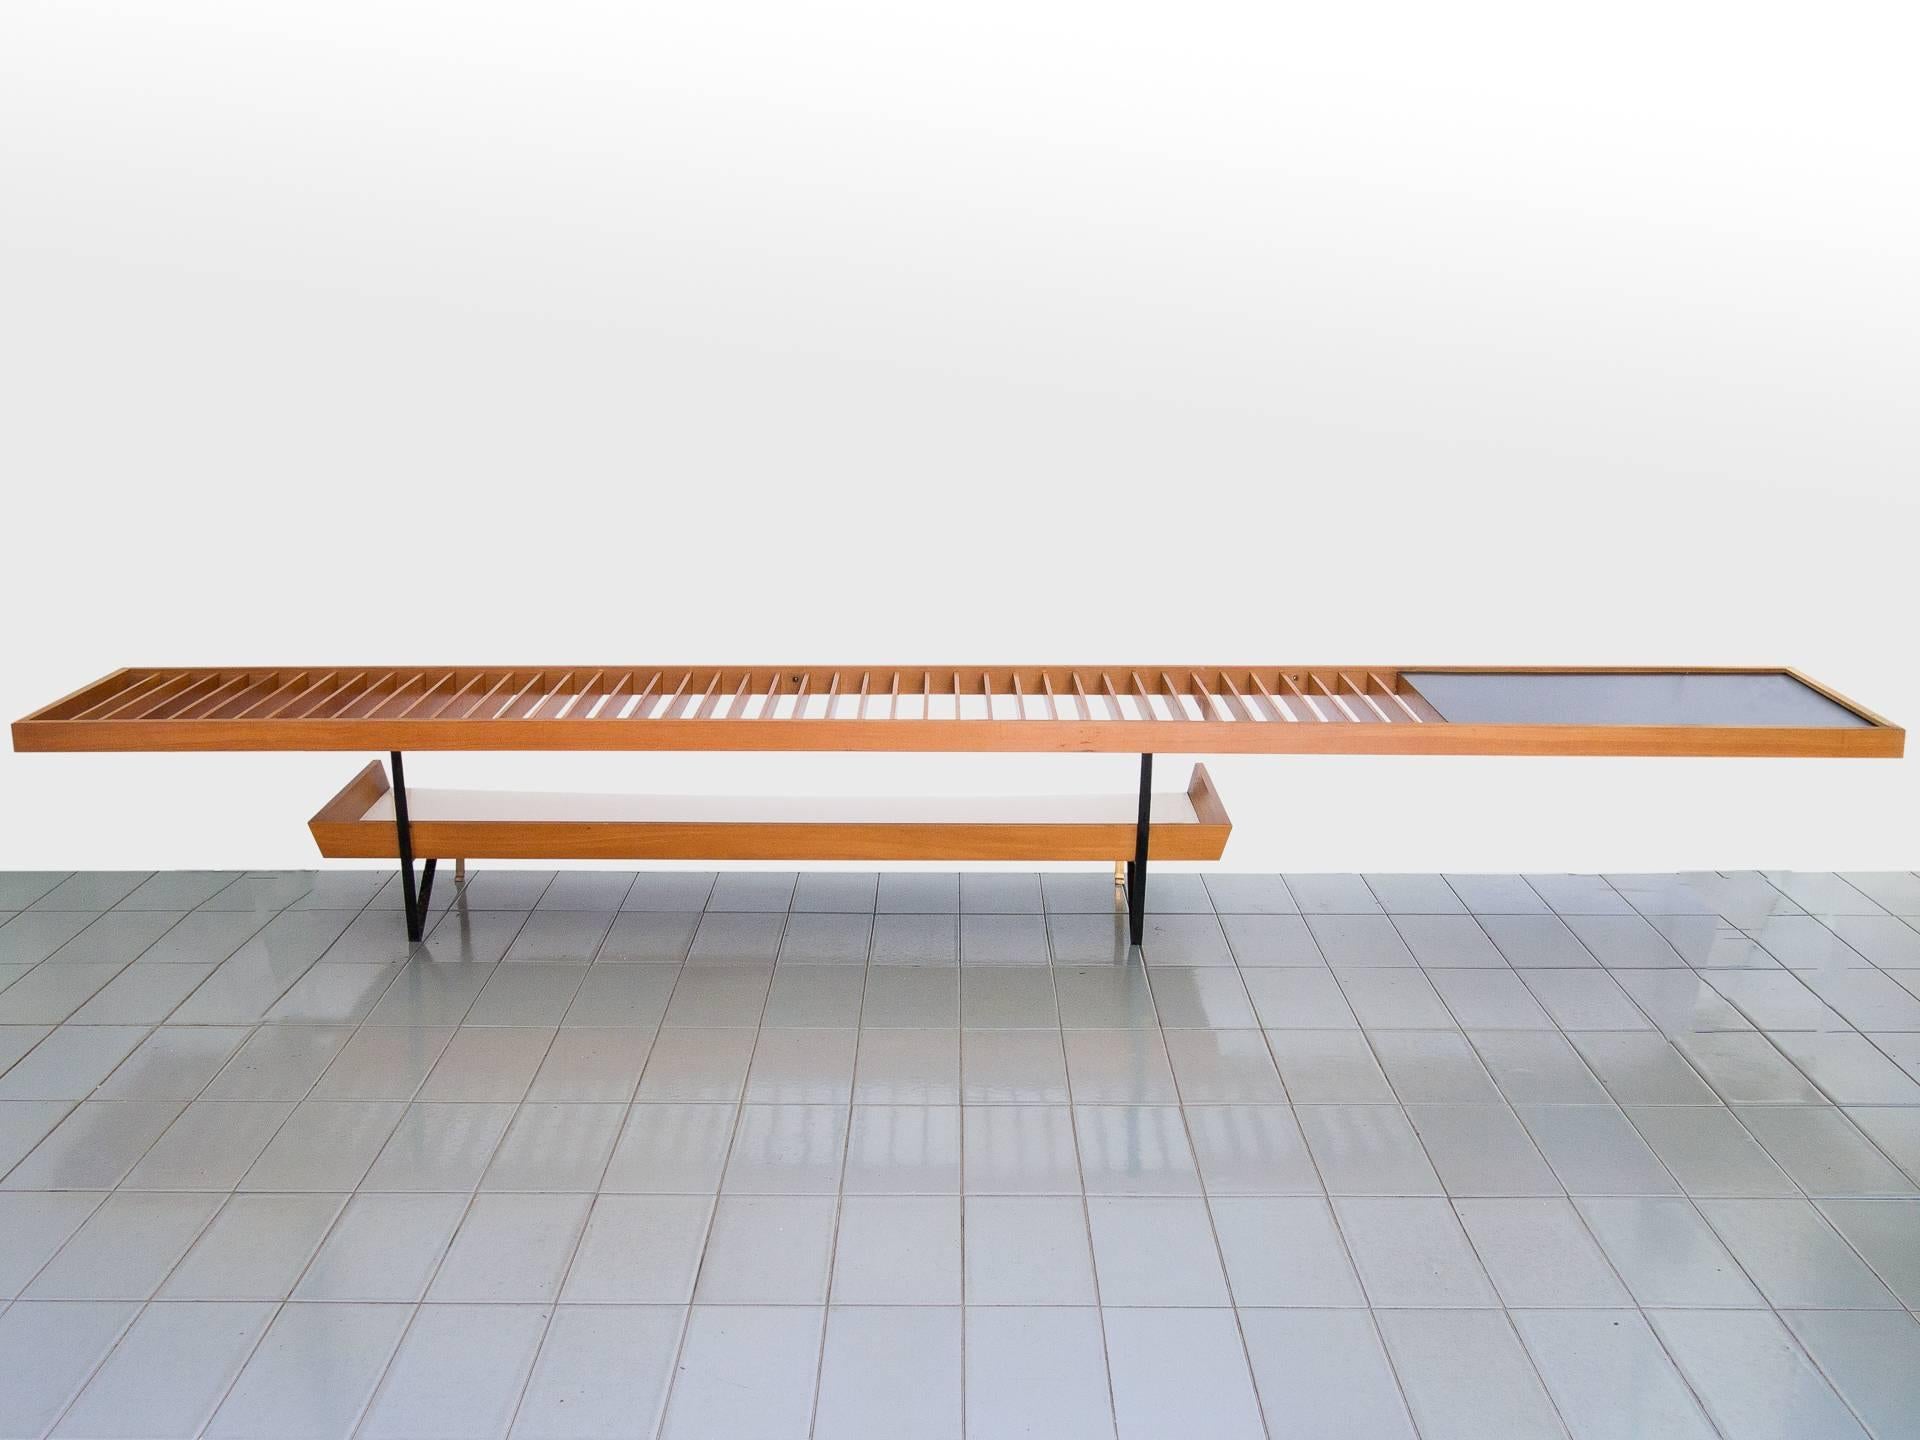 Huge table or bench made of vertical Pau Marfim slats, with magazine holder underneath and a formica top table to the right side. This piece is unique and made to order in 1958. It should be fixed to the walls in the back and on the right side